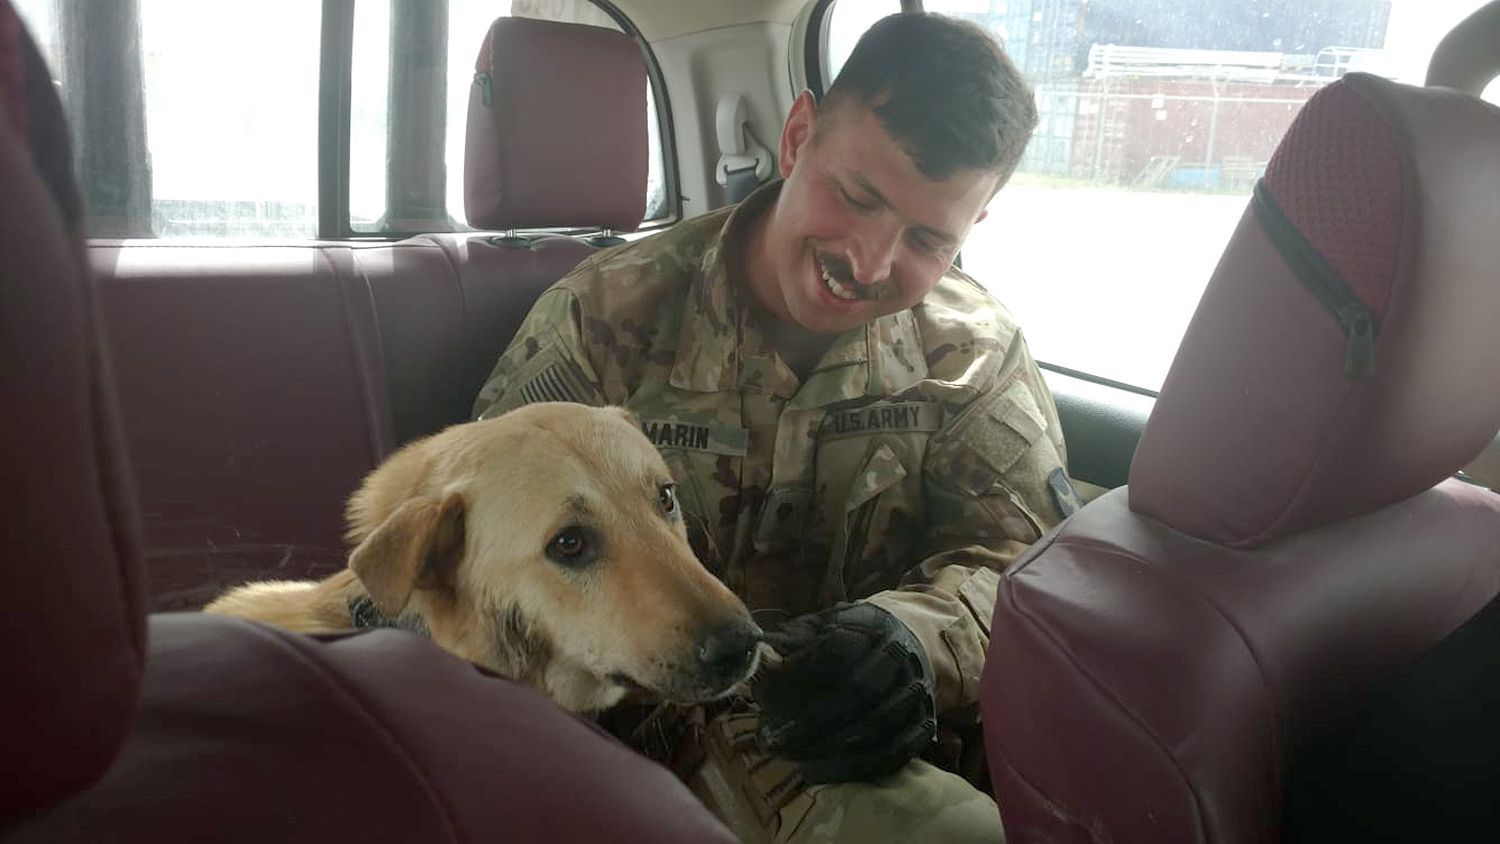 man reunited with dog